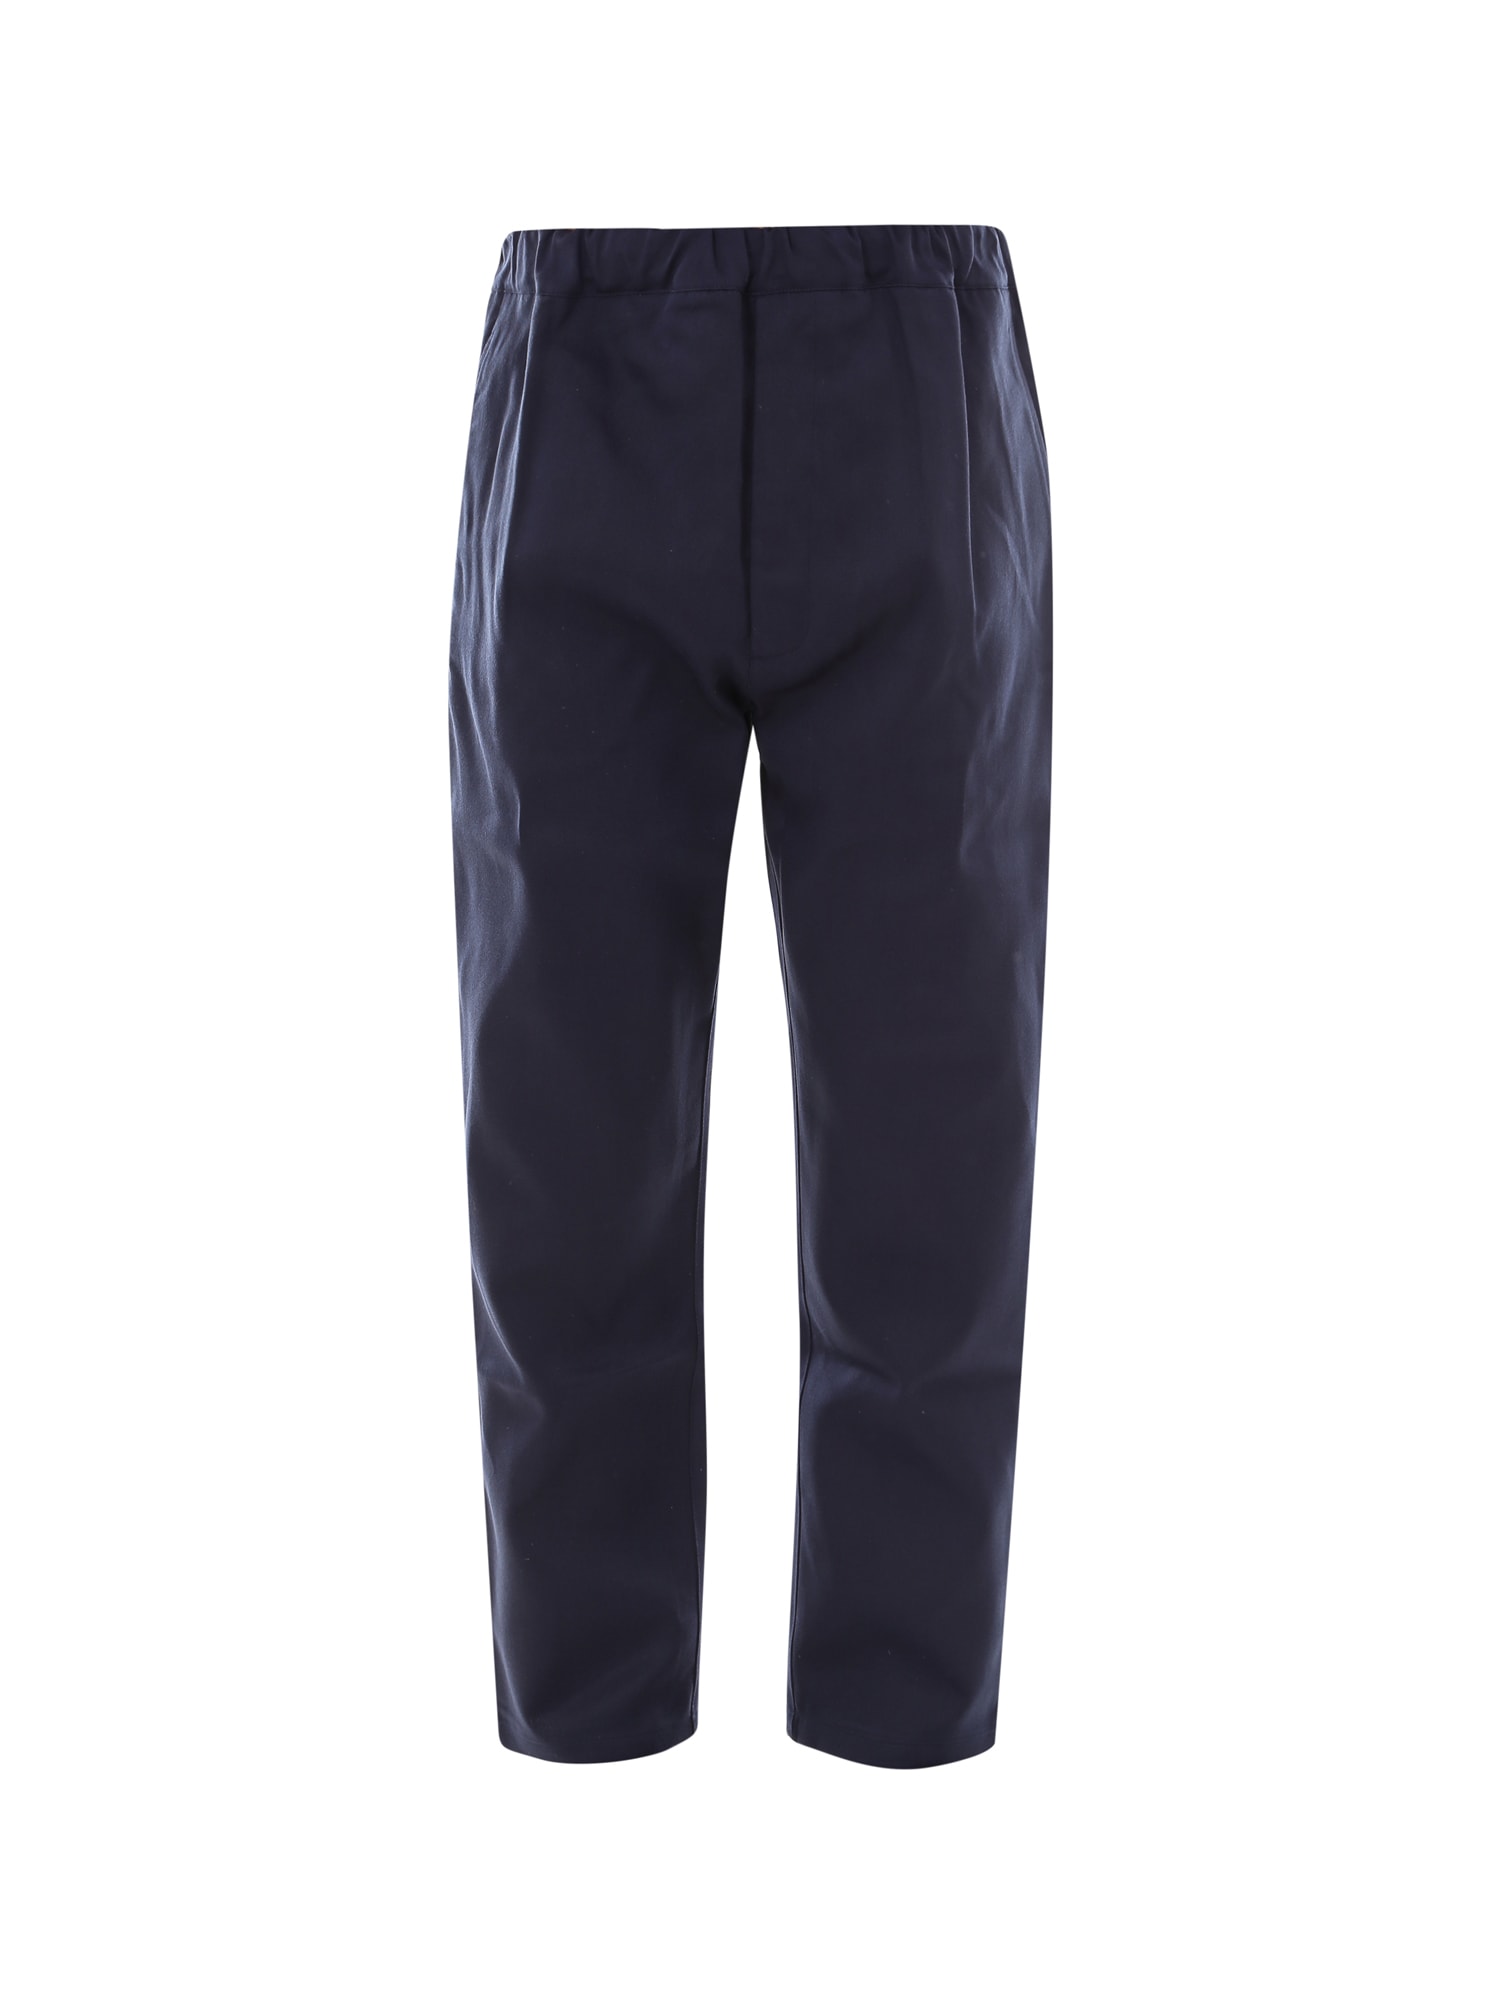 THE SILTED COMPANY TROUSER,CLSBNY NAVY